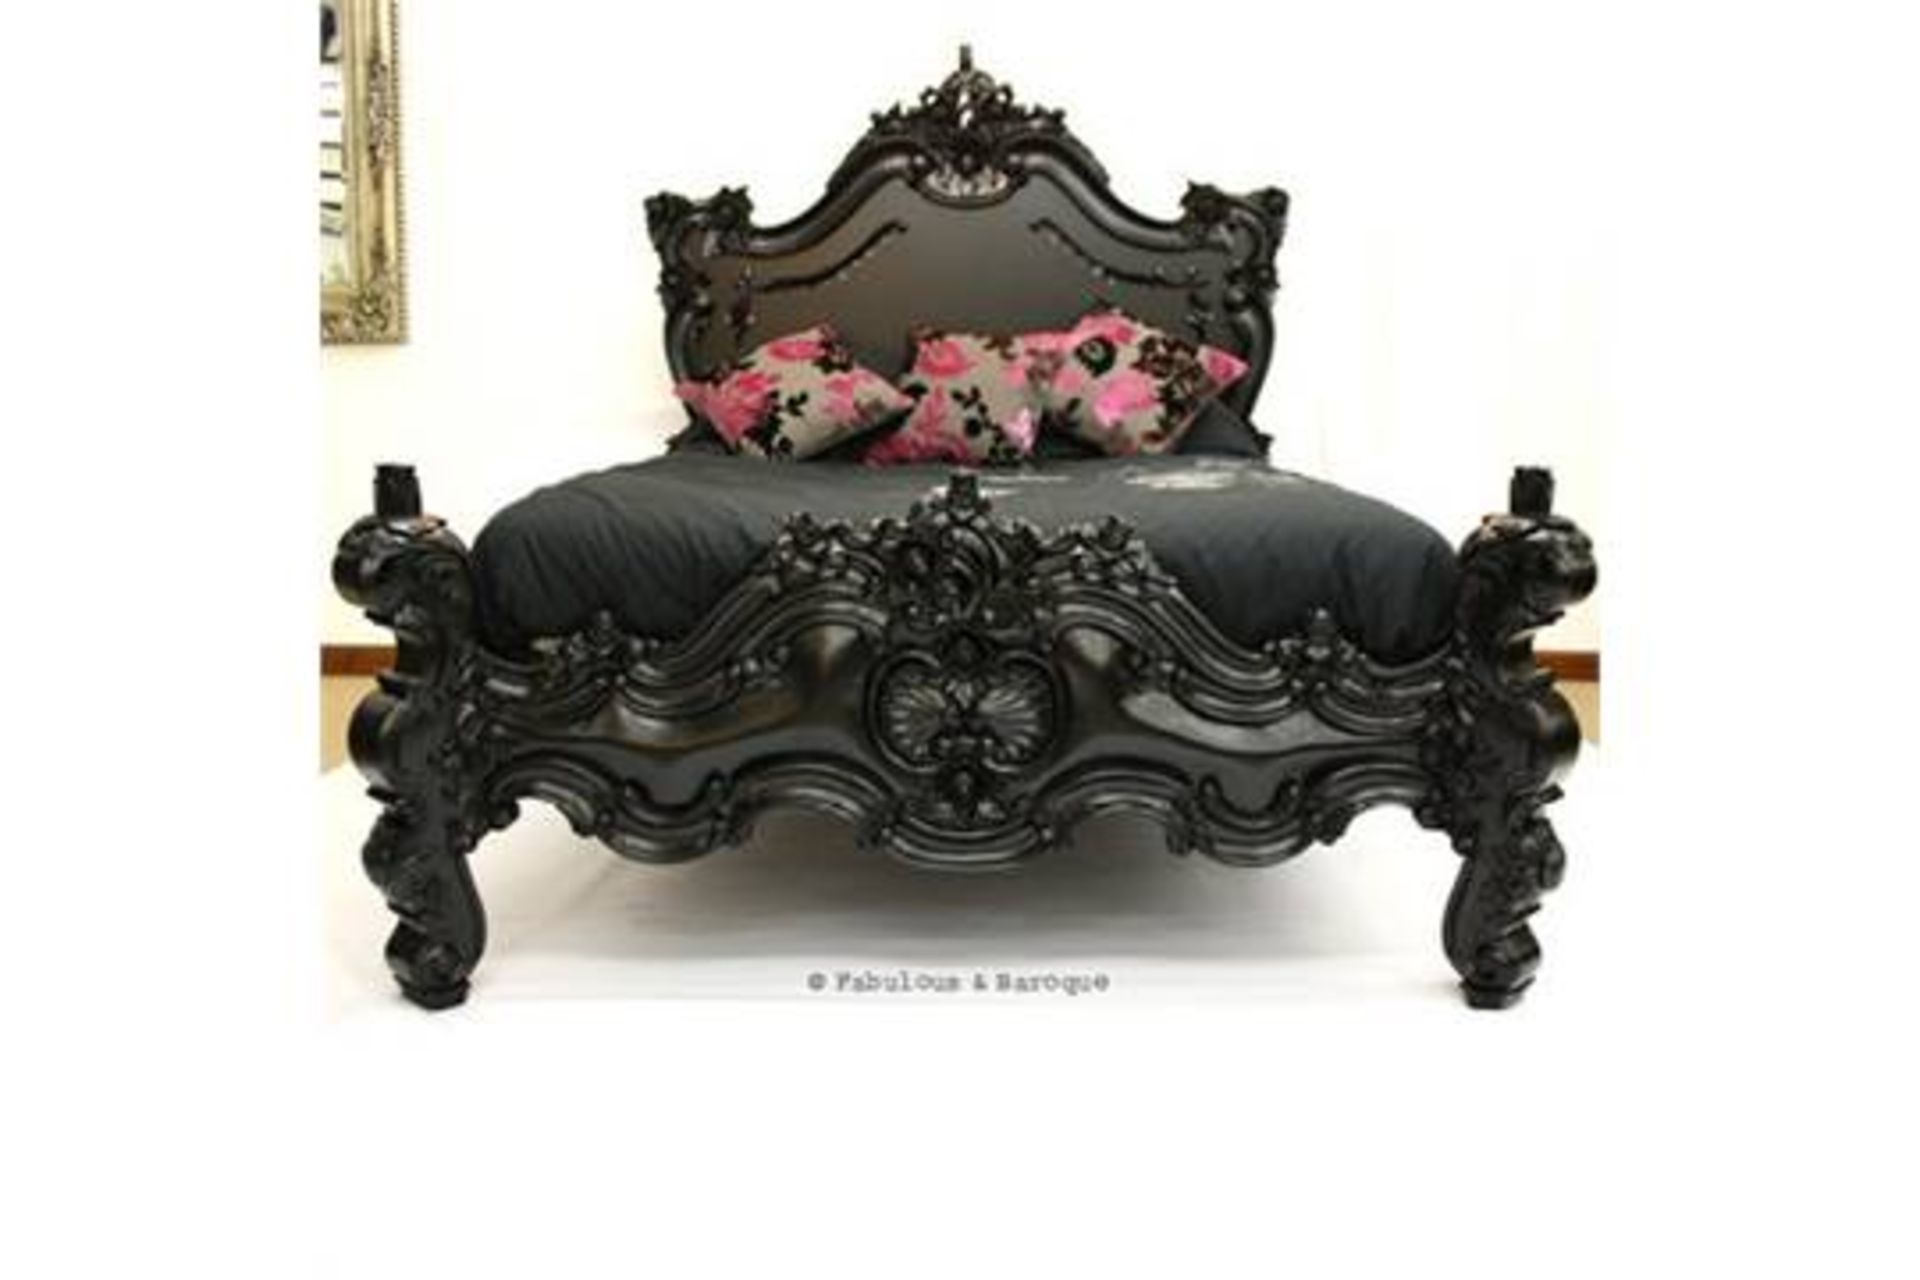 4ft 6in Double
Royal Fortune Montespan Bed - Black -  The Fabulous & Rococo Bed features
exaggerated